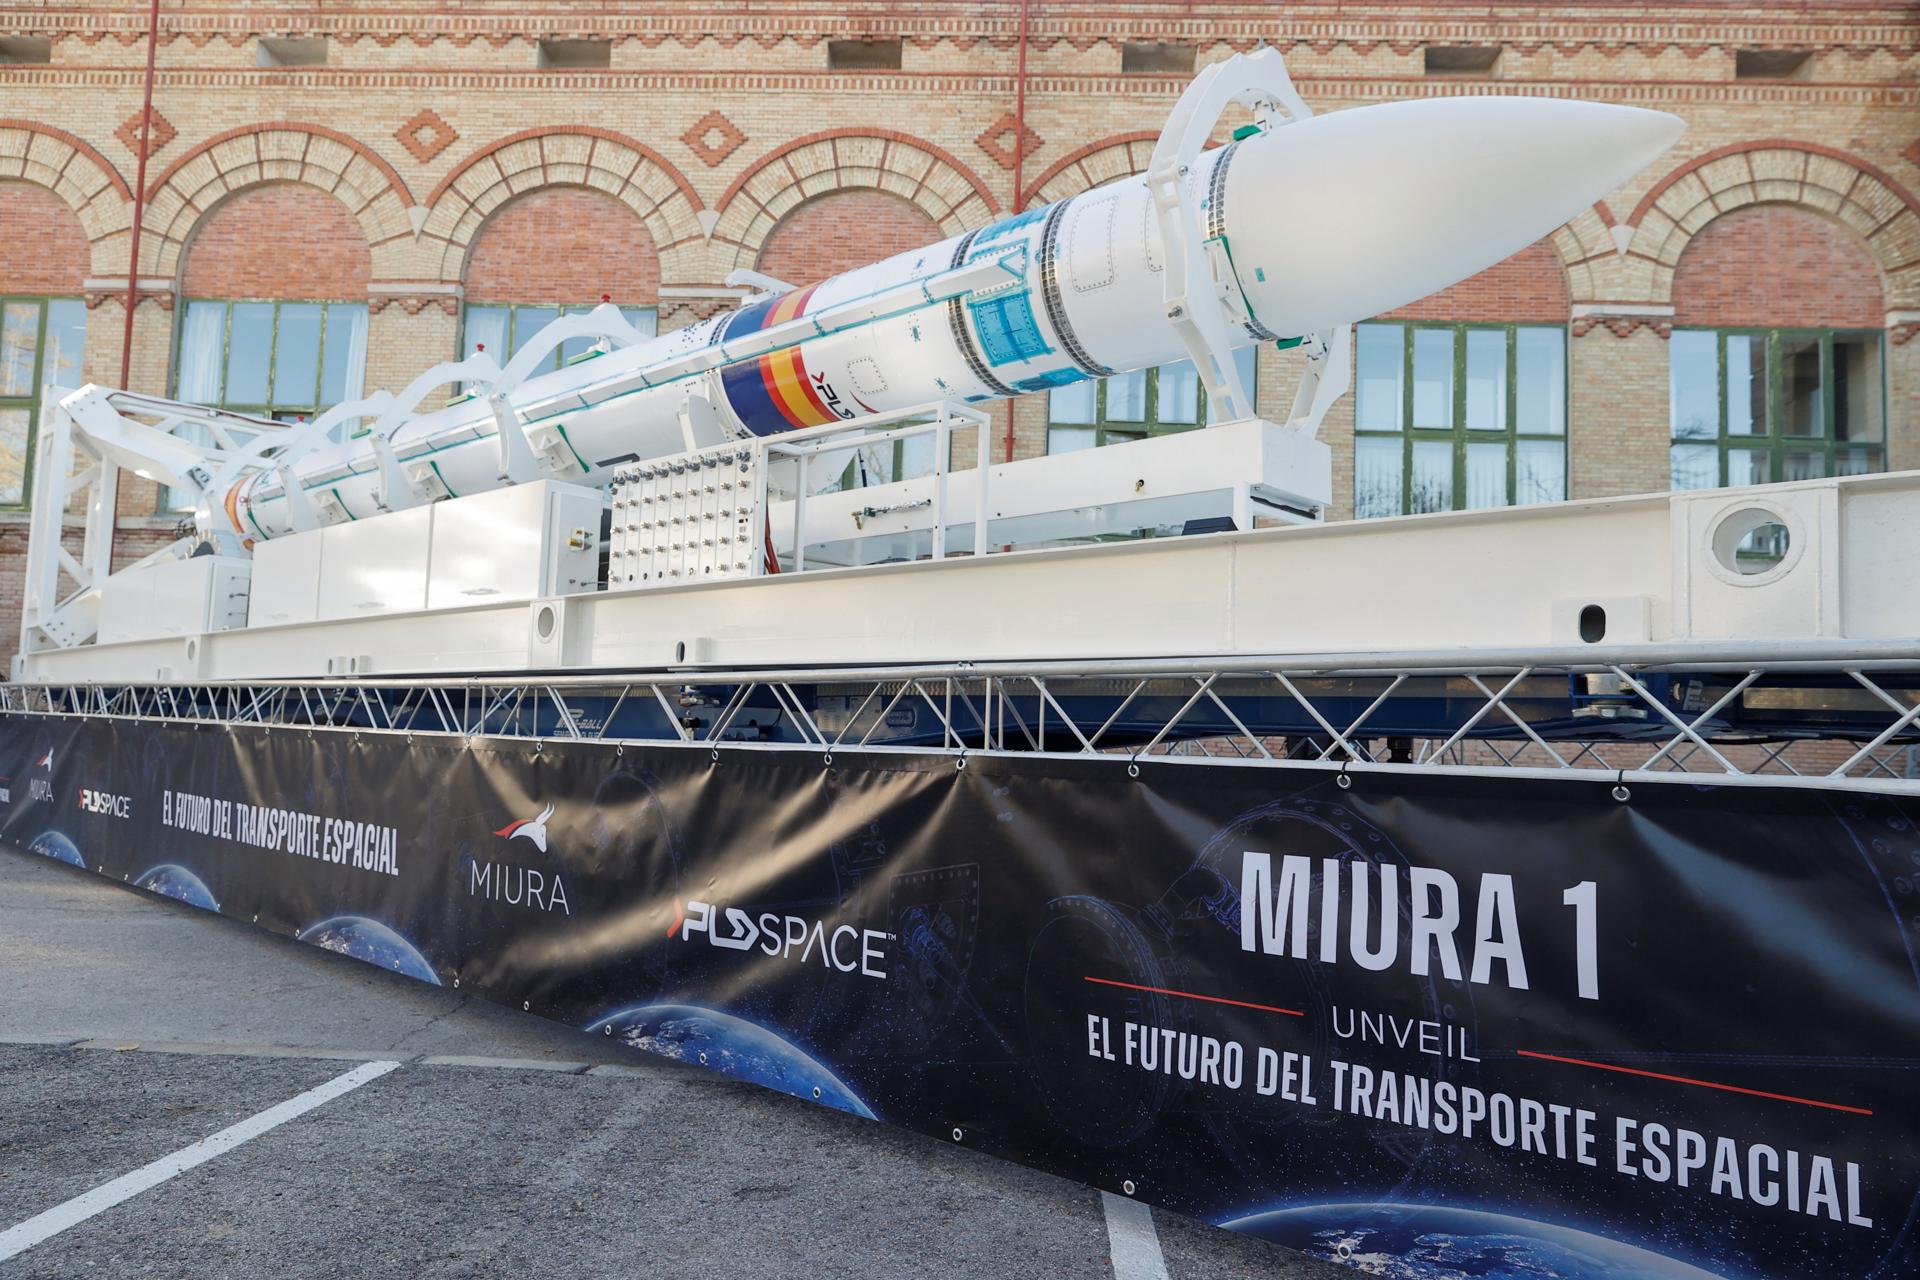 Miura 1, a reusable space rocket developed by the Spanish company PLD Space, in Madrid, Spain on Dec. 11, 2021. EFE FILE/Emilio Naranjo
